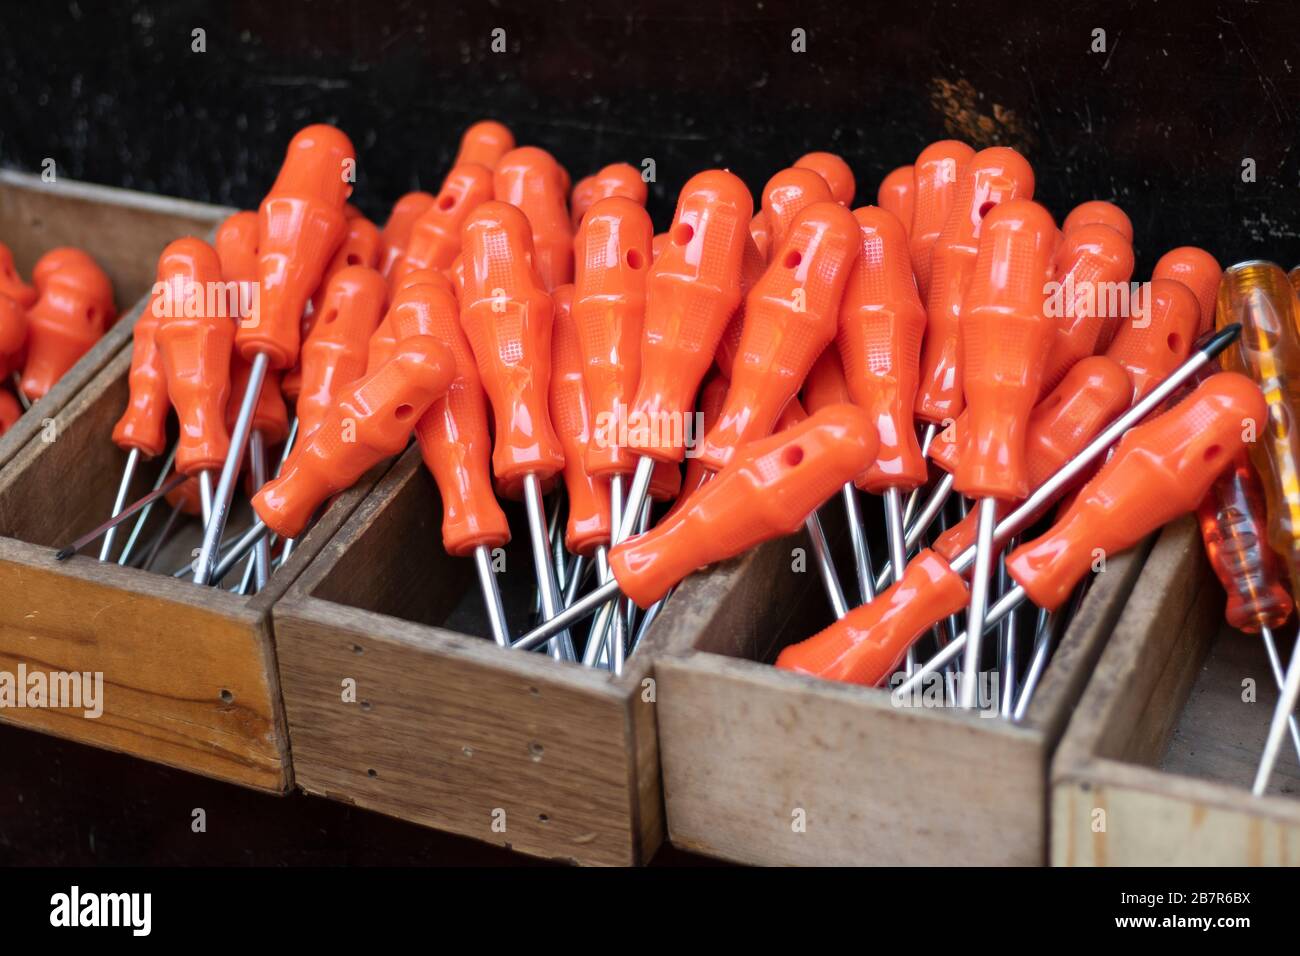 Screwdrivers at checkout in front of the store. Our red handle is stalked. It is unused and new. Close up. Stock Photo